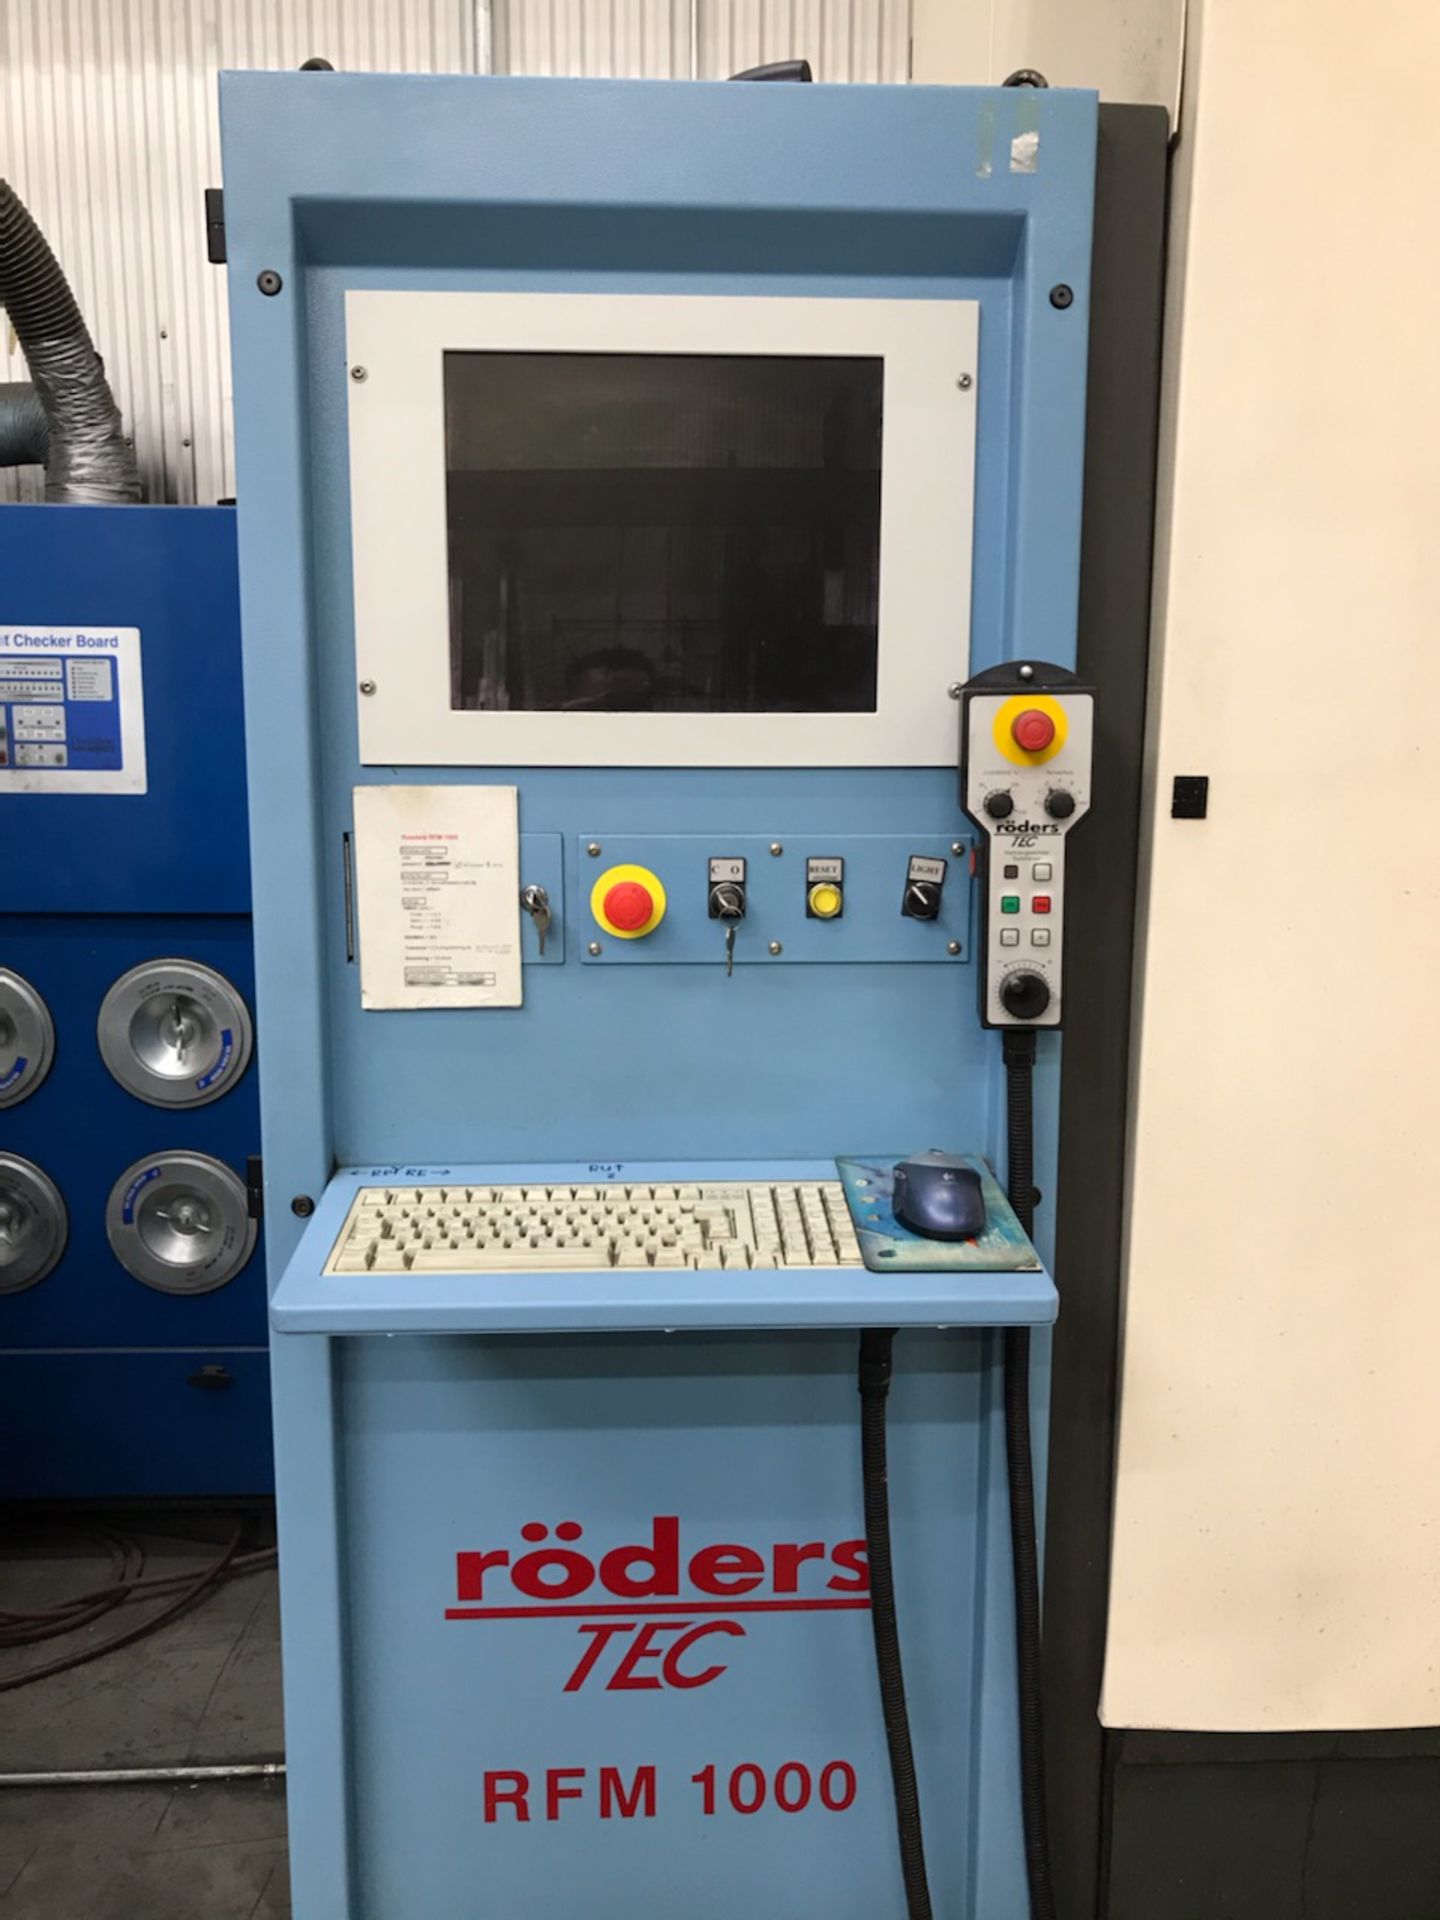 Roders RFM 1000 CNC 3-Axis Vertical Machining Center - Image 2 of 11